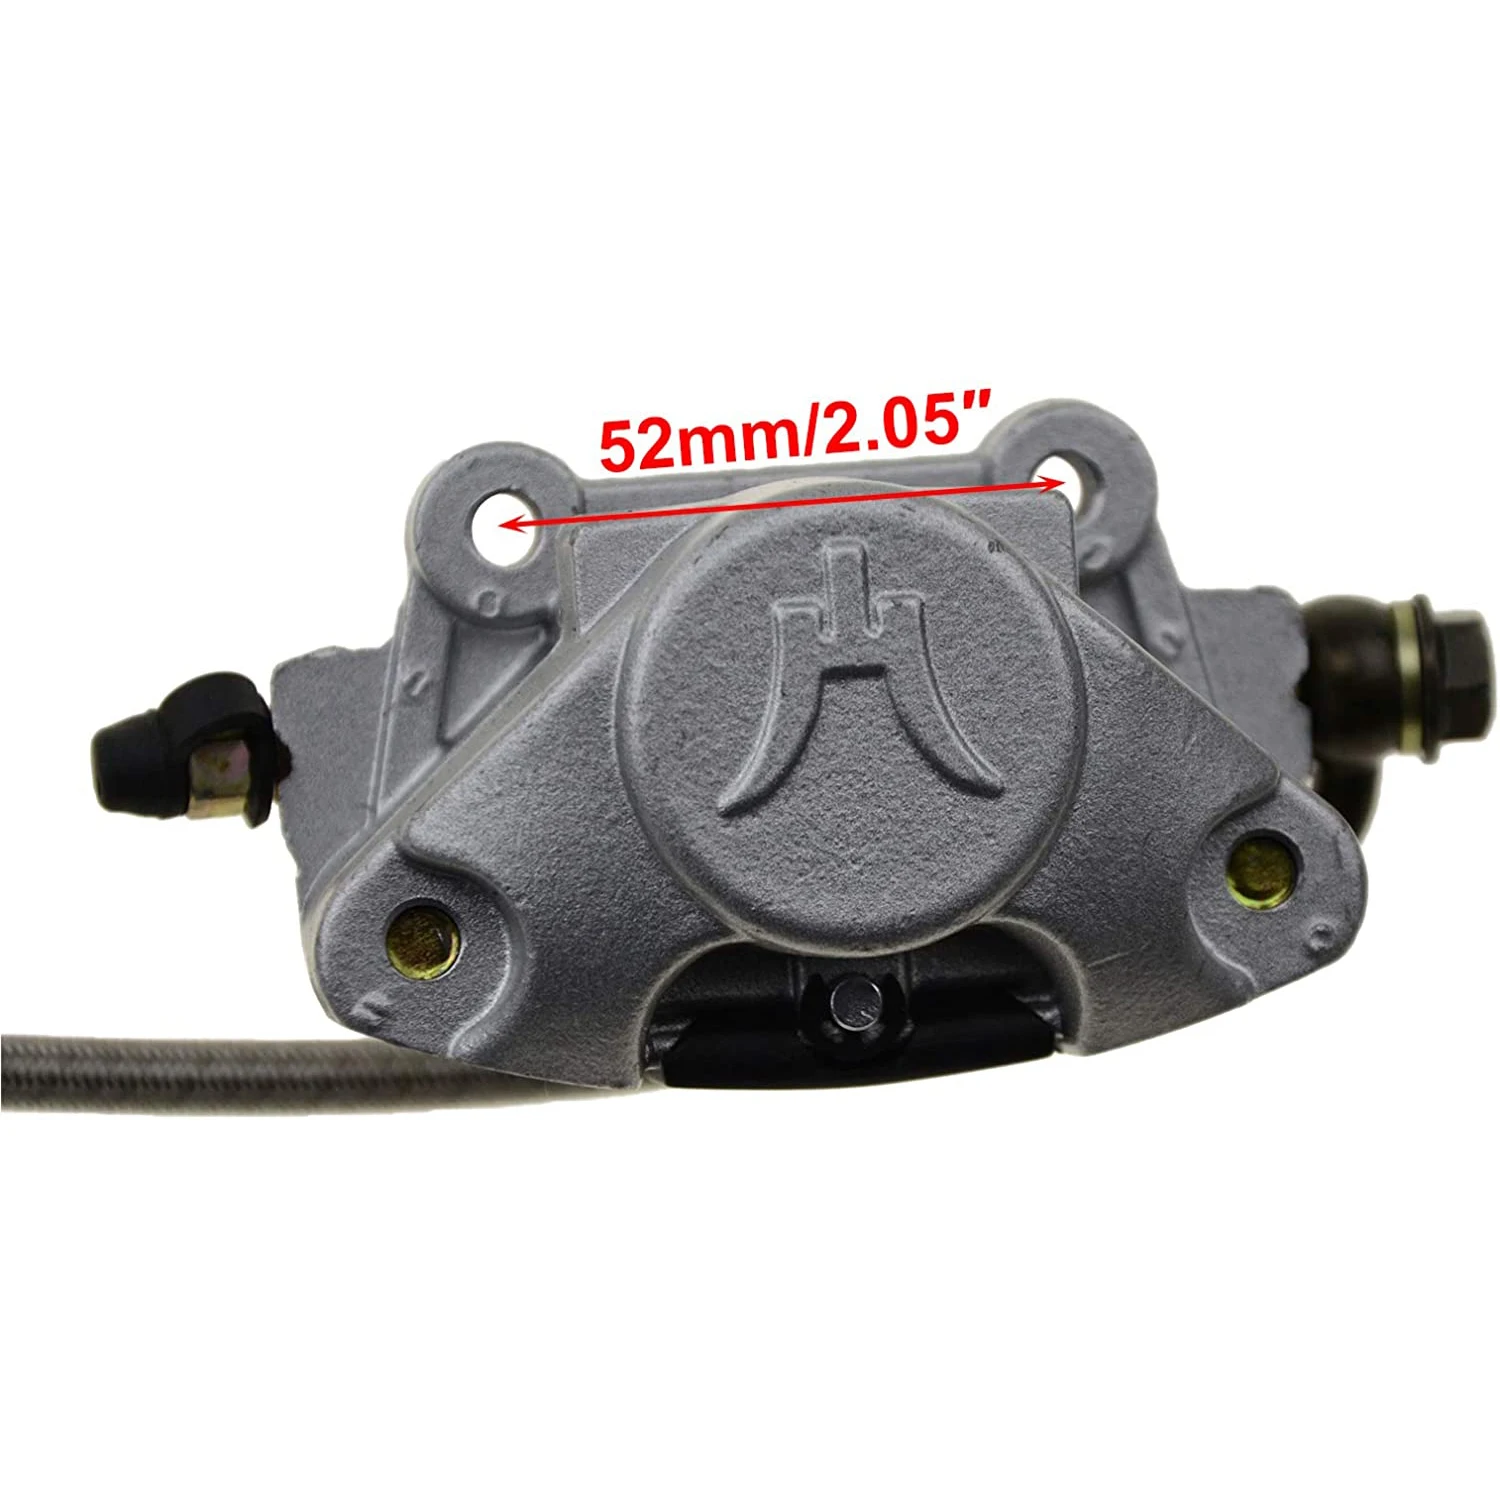 GOOFIT Motorcycle Rear Disc Brake Master Cylinder with Oiler Quad Caliper for 50cc 70cc 90cc 110cc125cc ATV Dirt Bike Scooter 